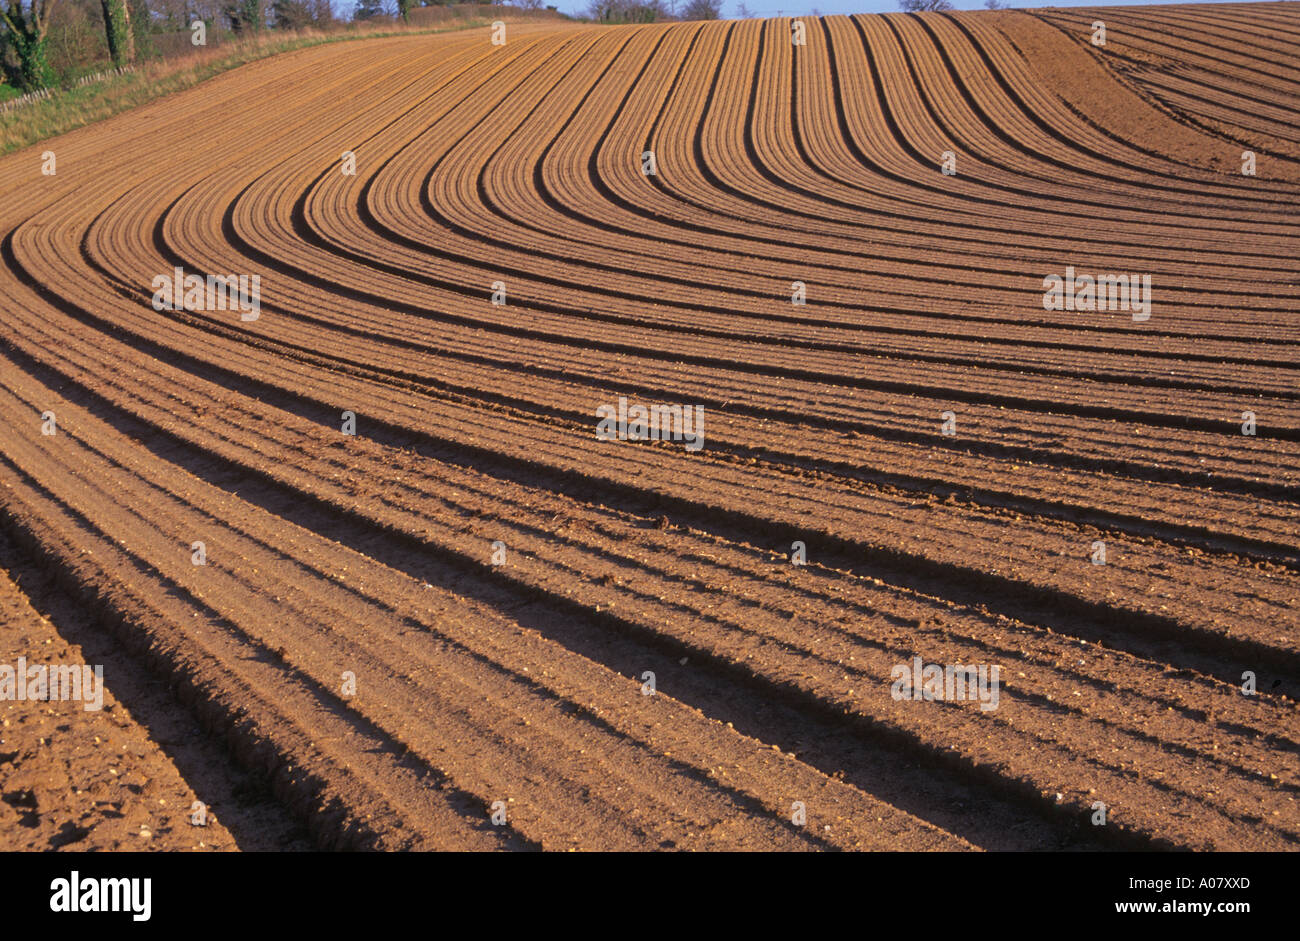 Pattern formed by ploughing sandy soil Suffolk Sandlings England Stock Photo